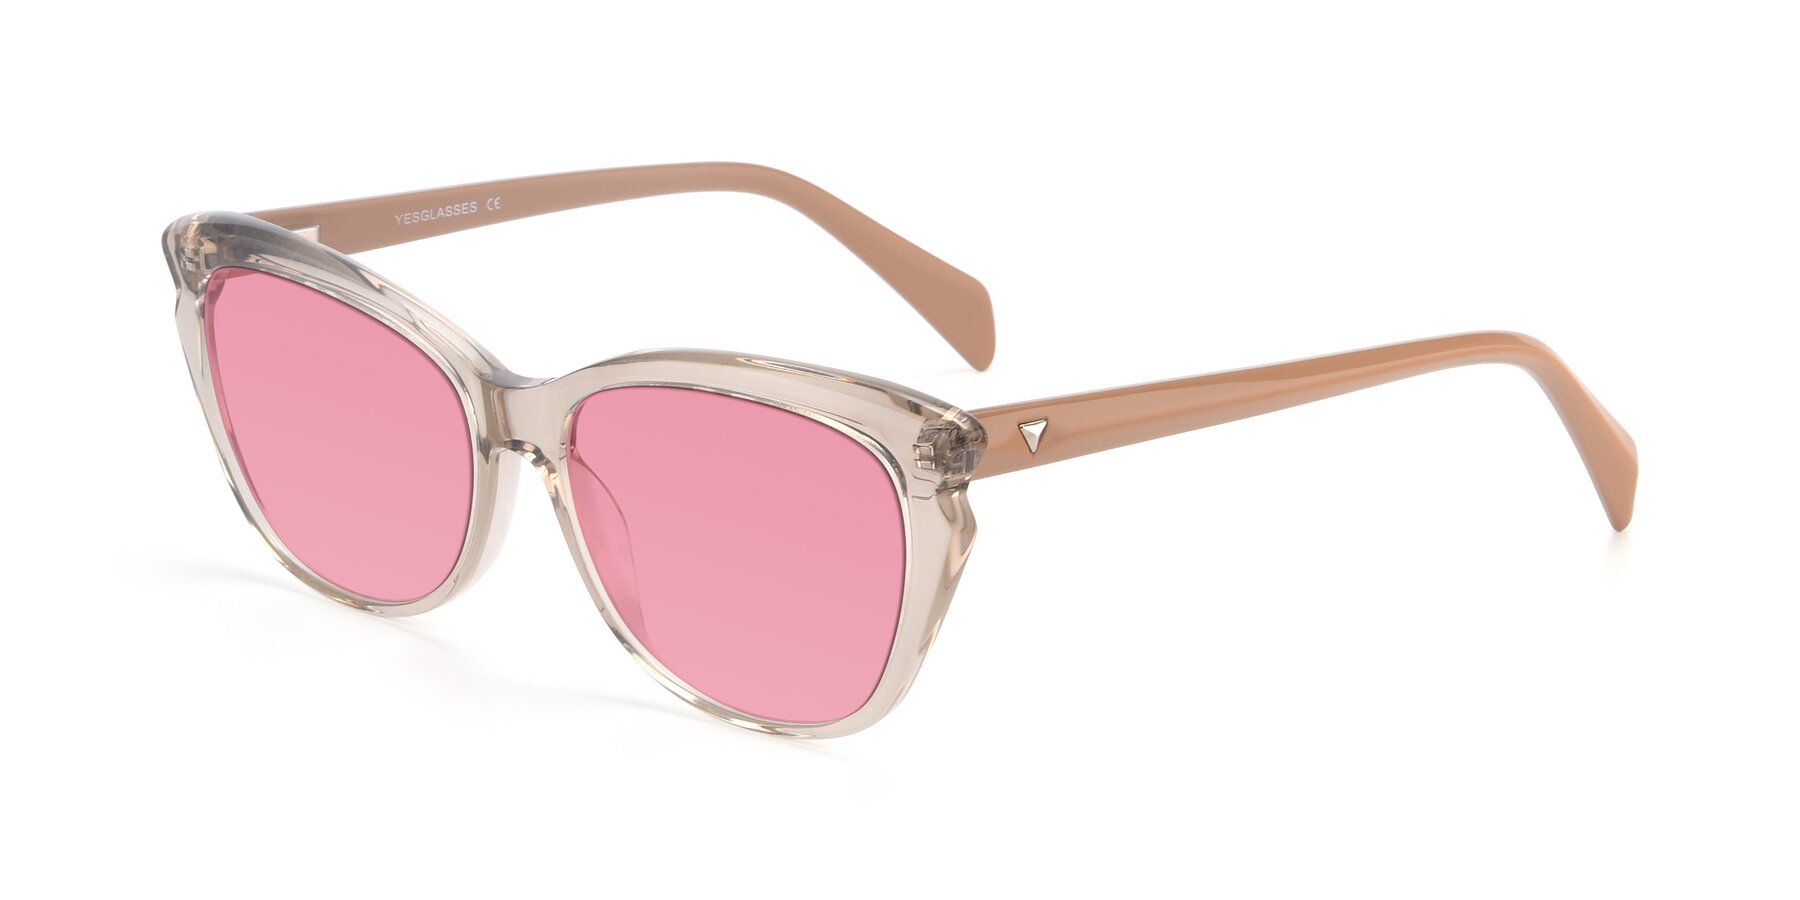 Angle of 17629 in Transparent Brown with Pink Tinted Lenses